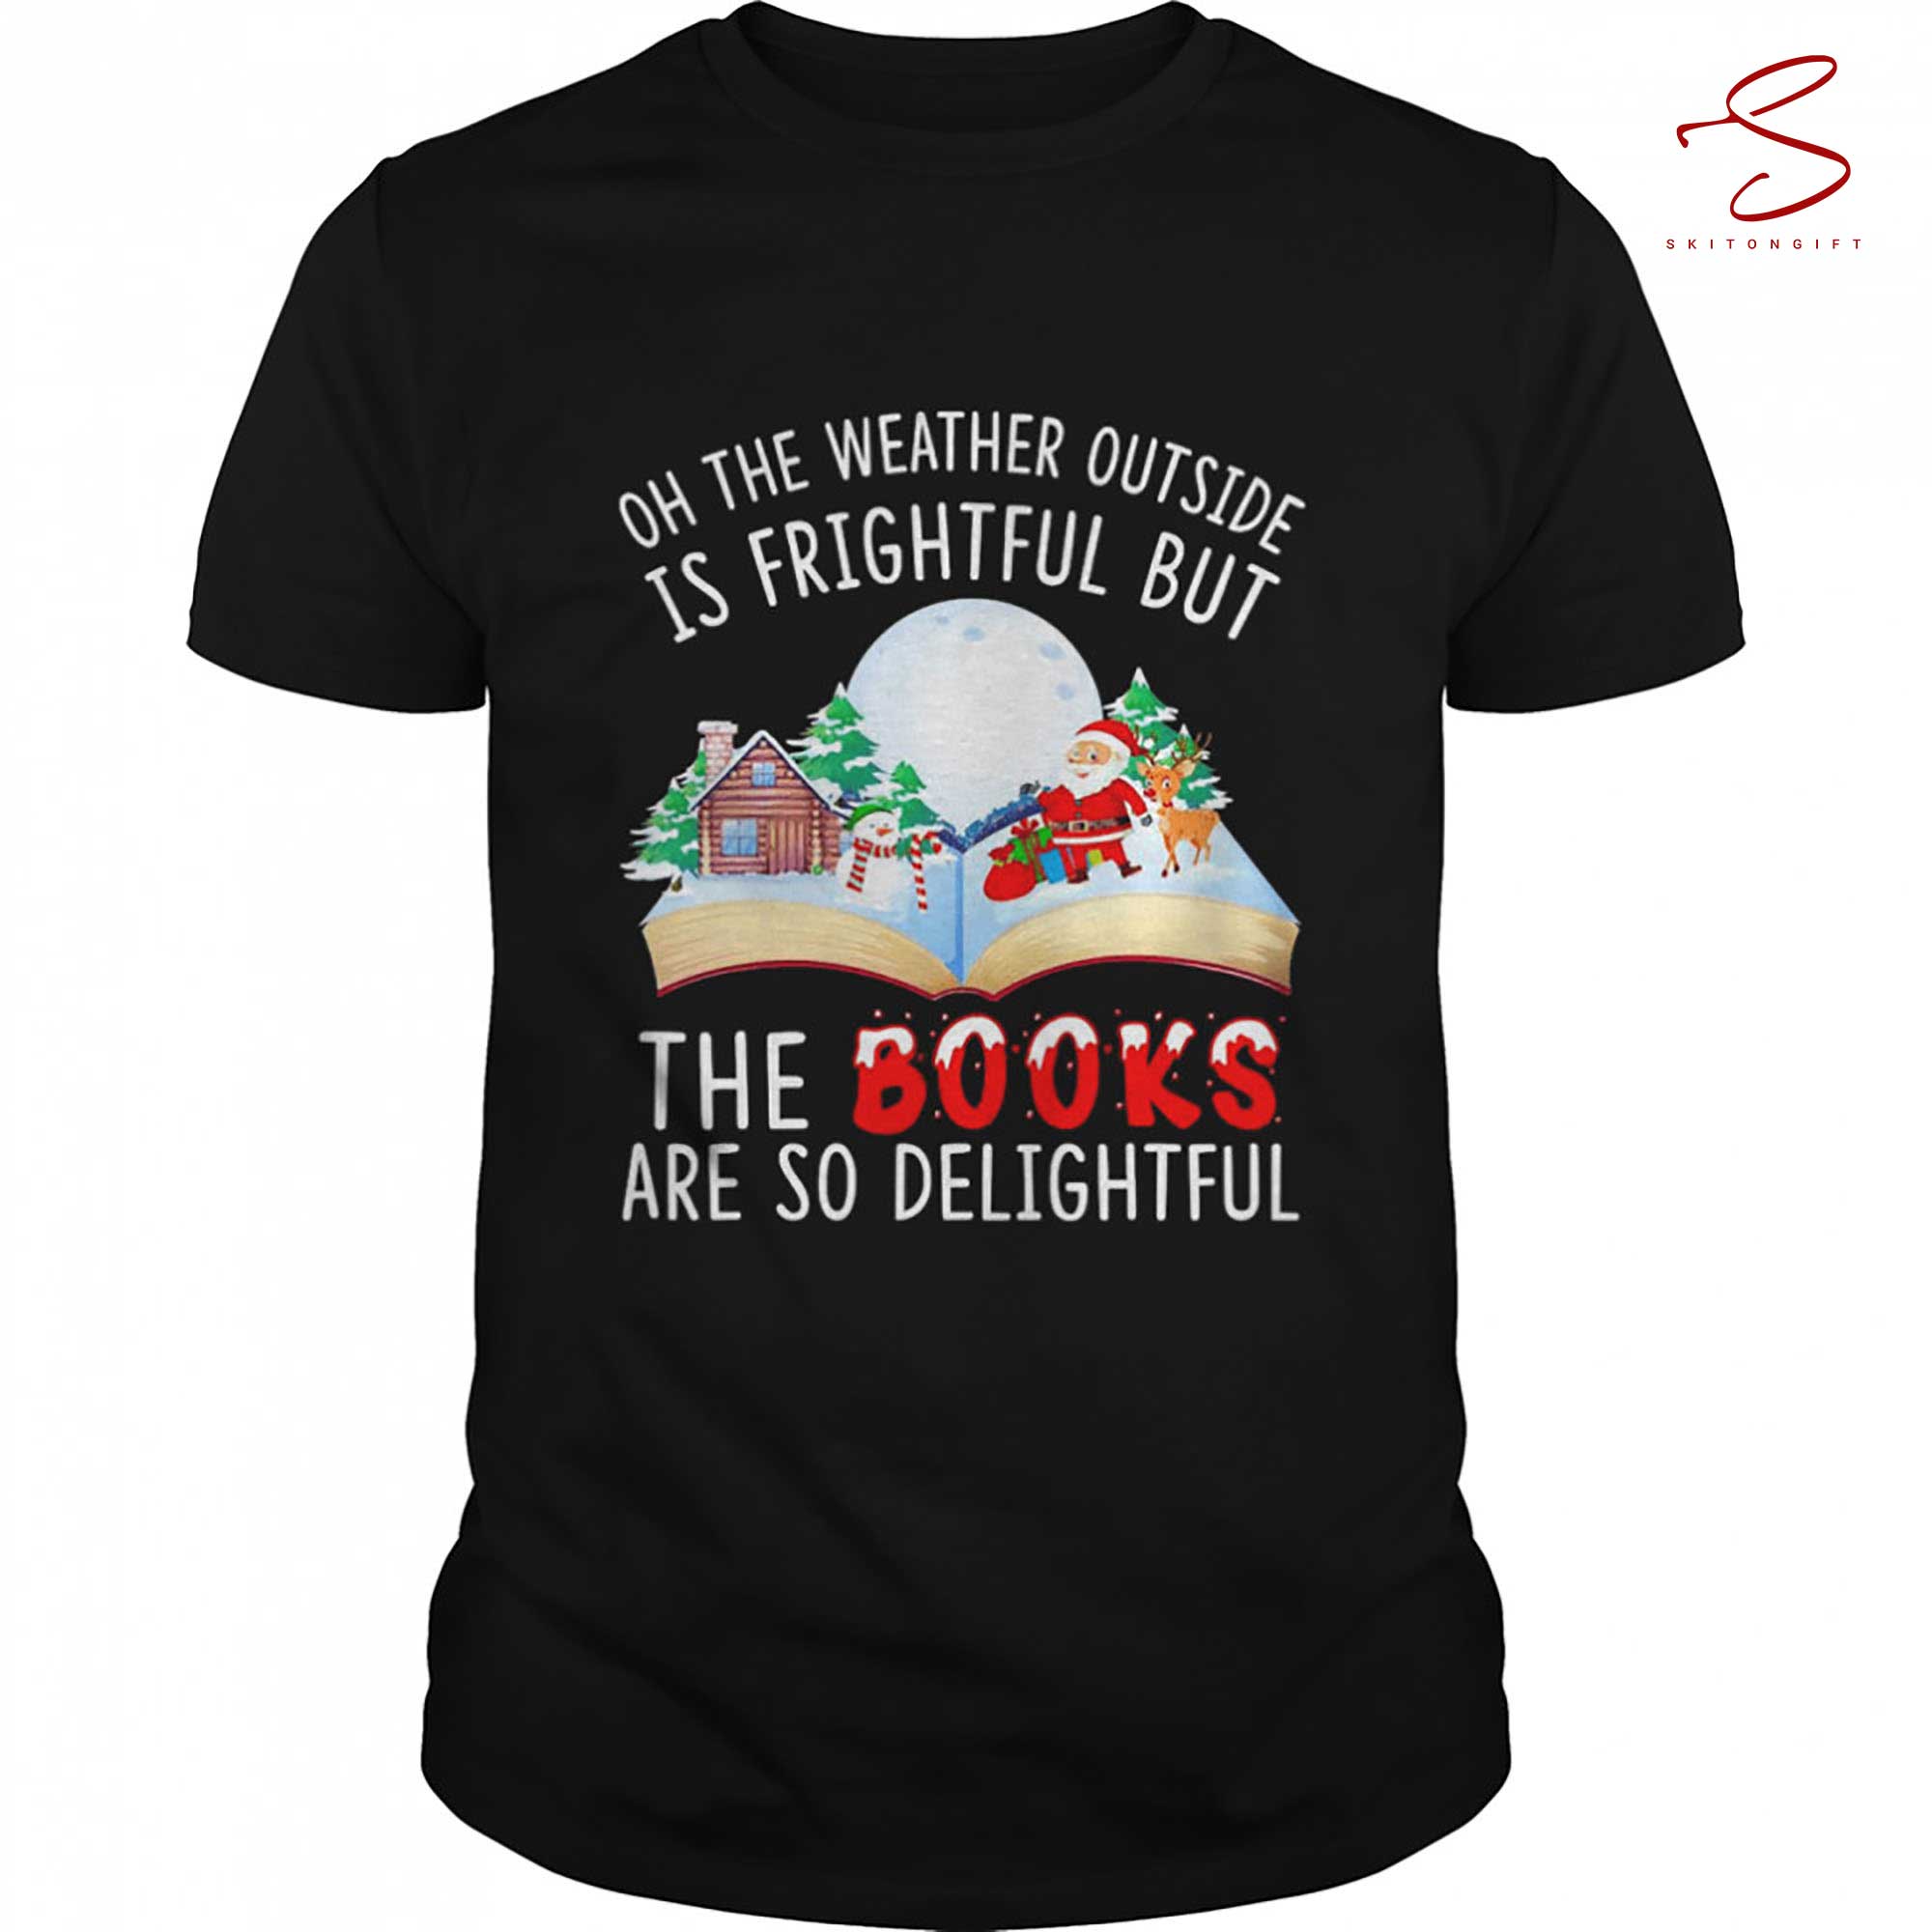 Skitongift Oh The Weather Outside Is Frightful But The Books Are So Delightful Christmas Shirt